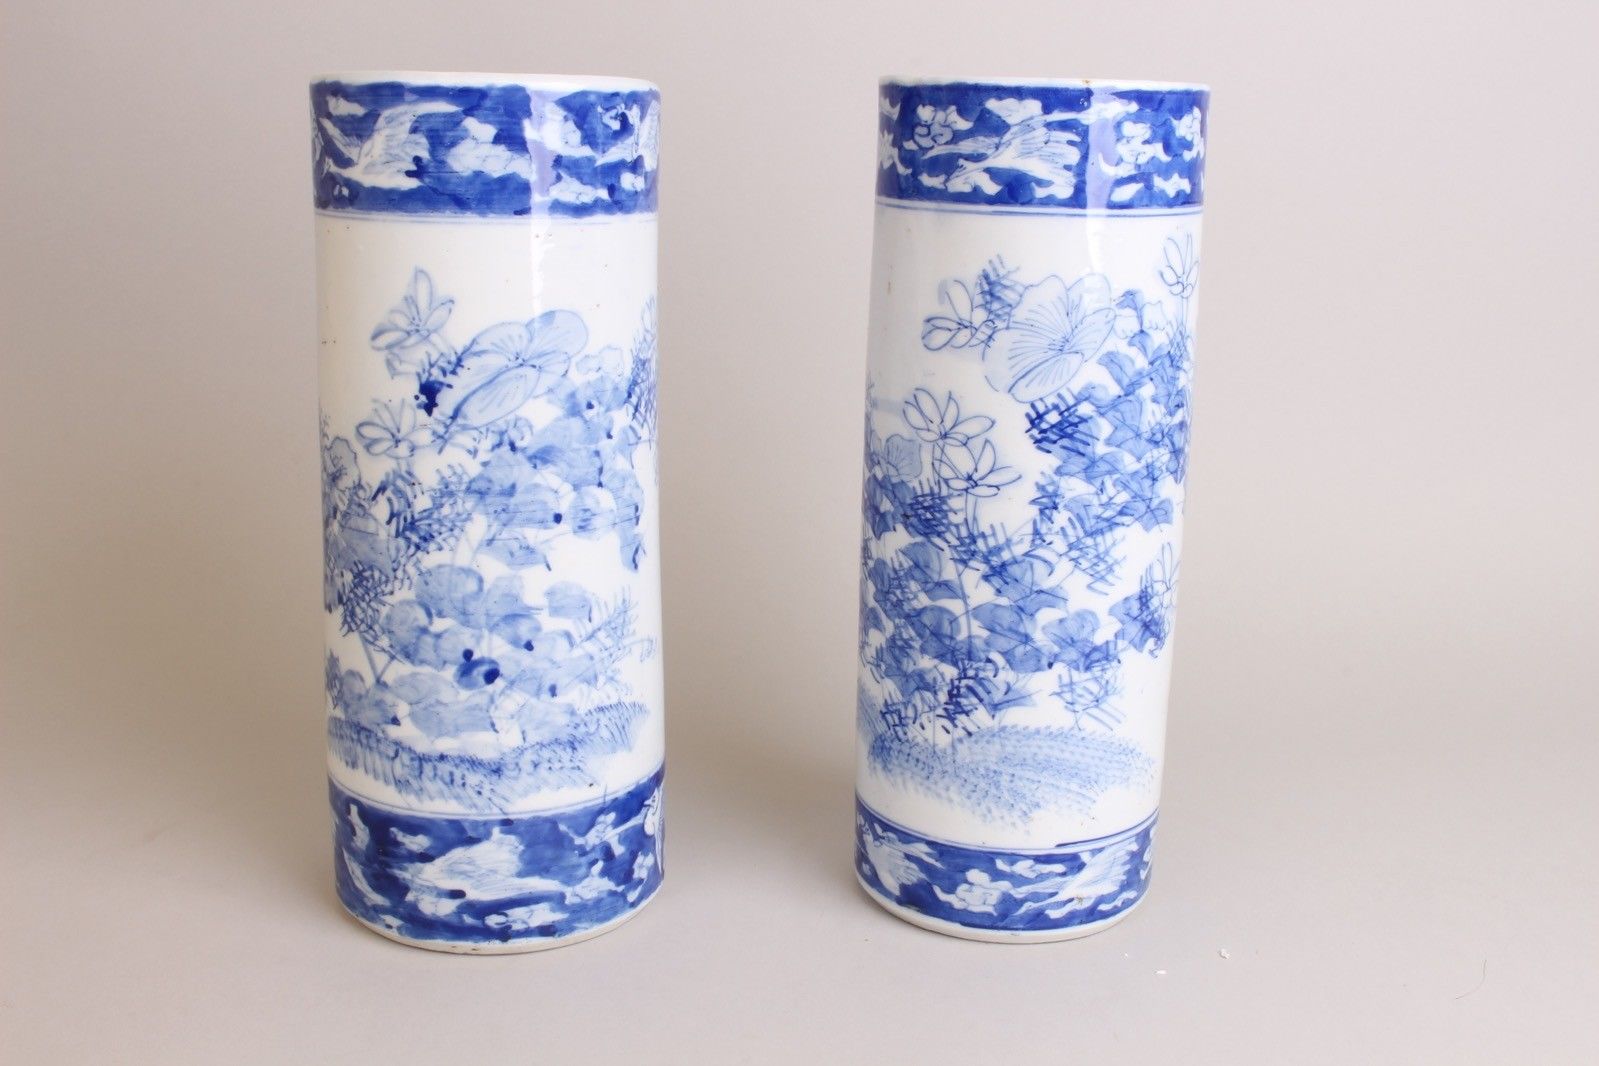 Pair of Blue and White Chinese Porcelain Republic Flower Vases, ca 1900.